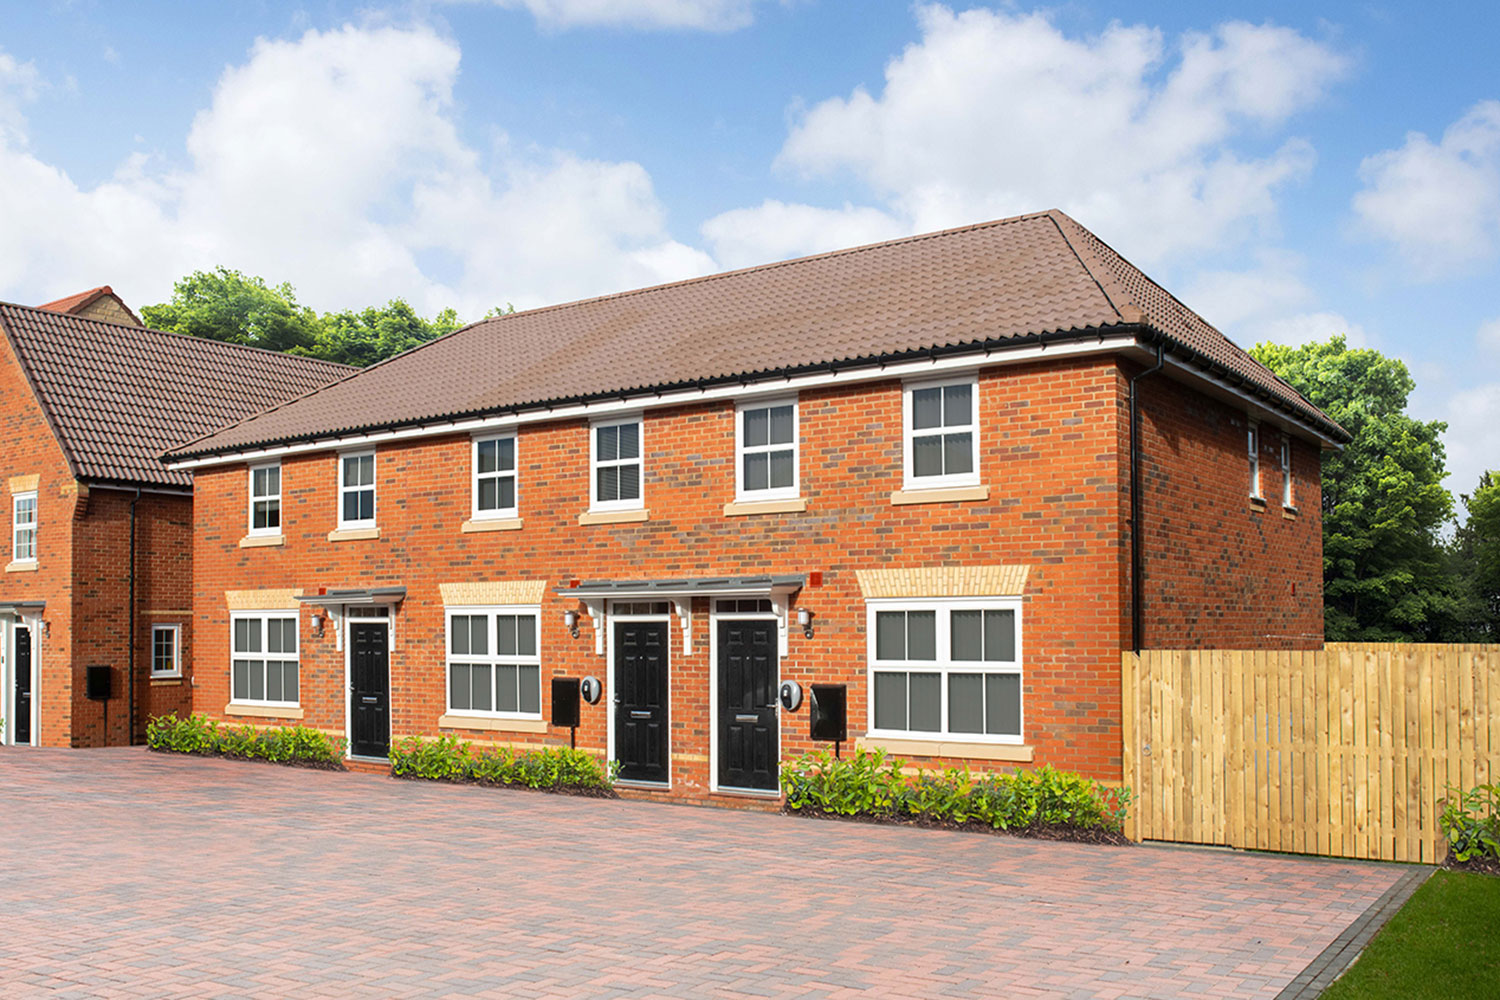 Property 1 of 7. The Archford At Minster View, Beverley